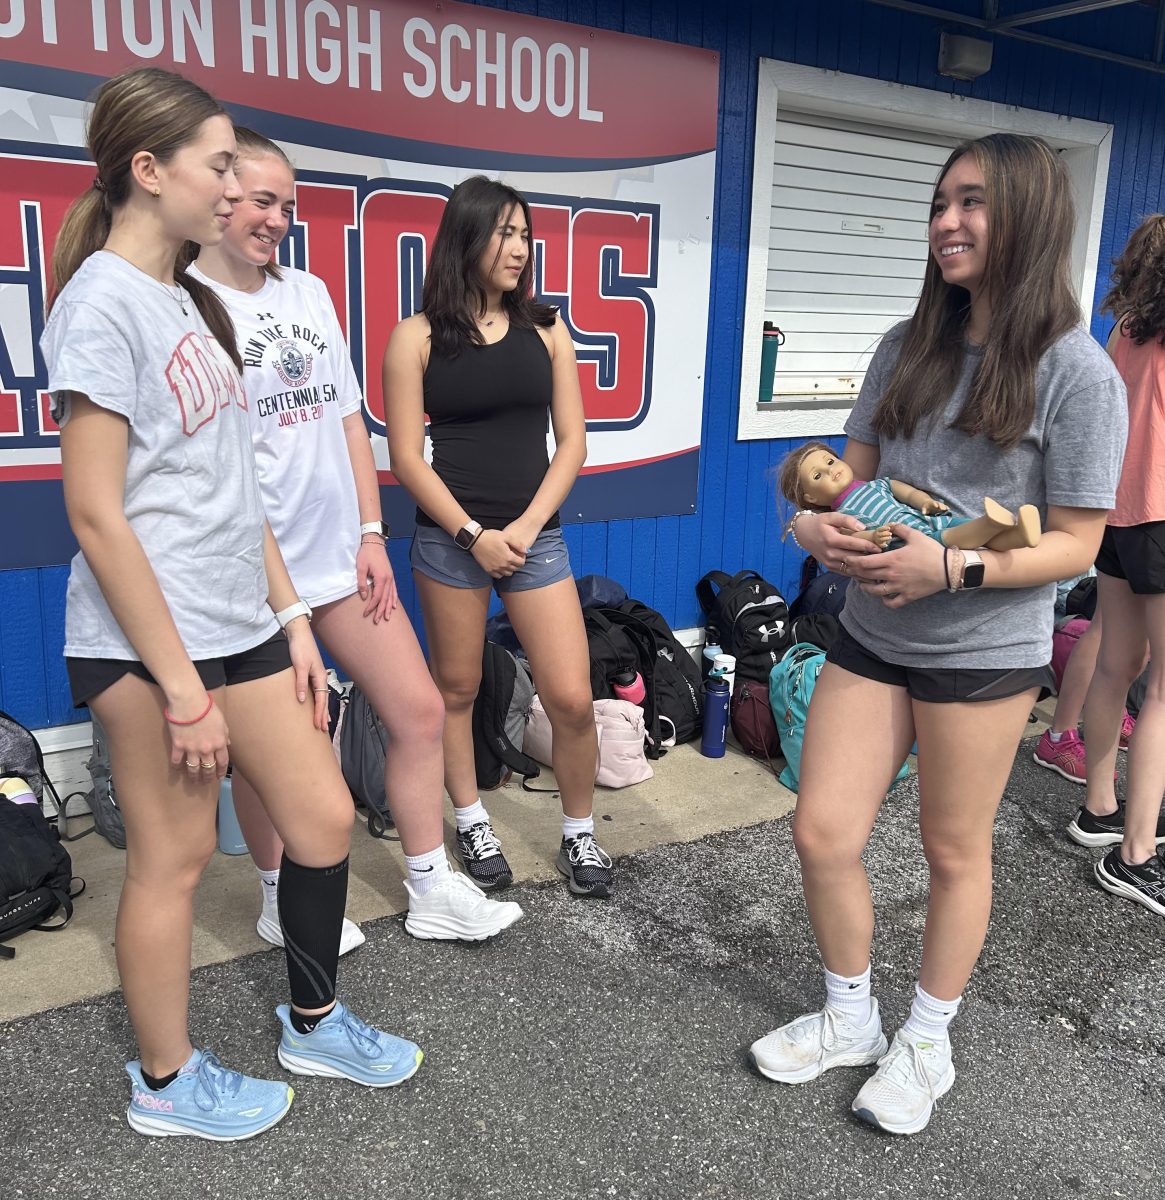 Sophomore Becca Hwang talks to junior Eva Veizis and sophomores Charlotte Hoffman and Olivia O’Connor while taking care of her baby before track practice on Mar. 13. “The child always has to be watched; even when you are going to the bathroom during class you need to find someone to watch the child,” Hwang said.